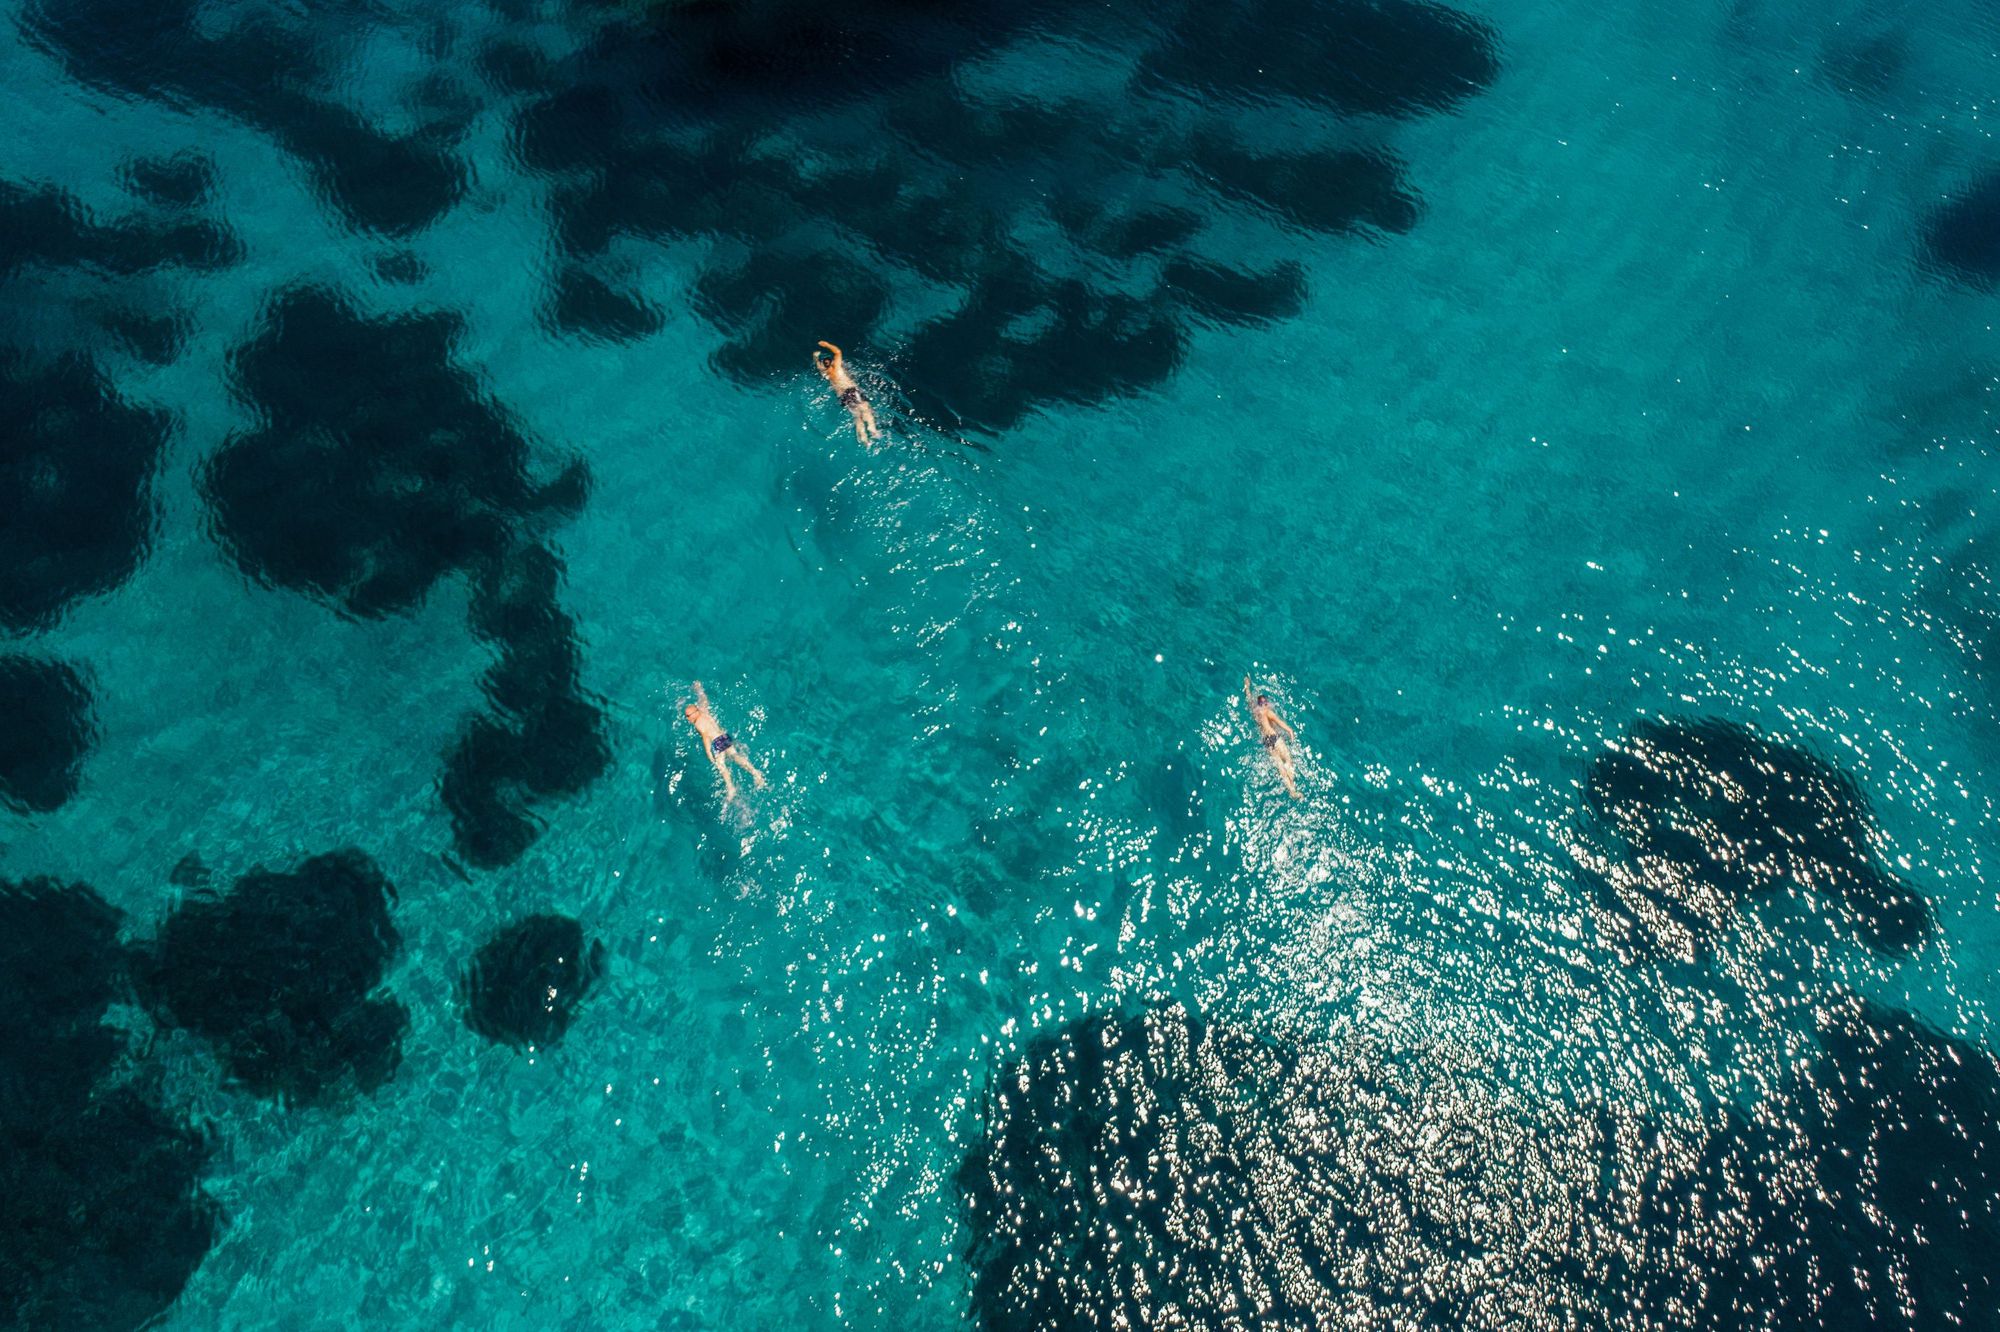 Swimmers in the Ionian Sea, Greece